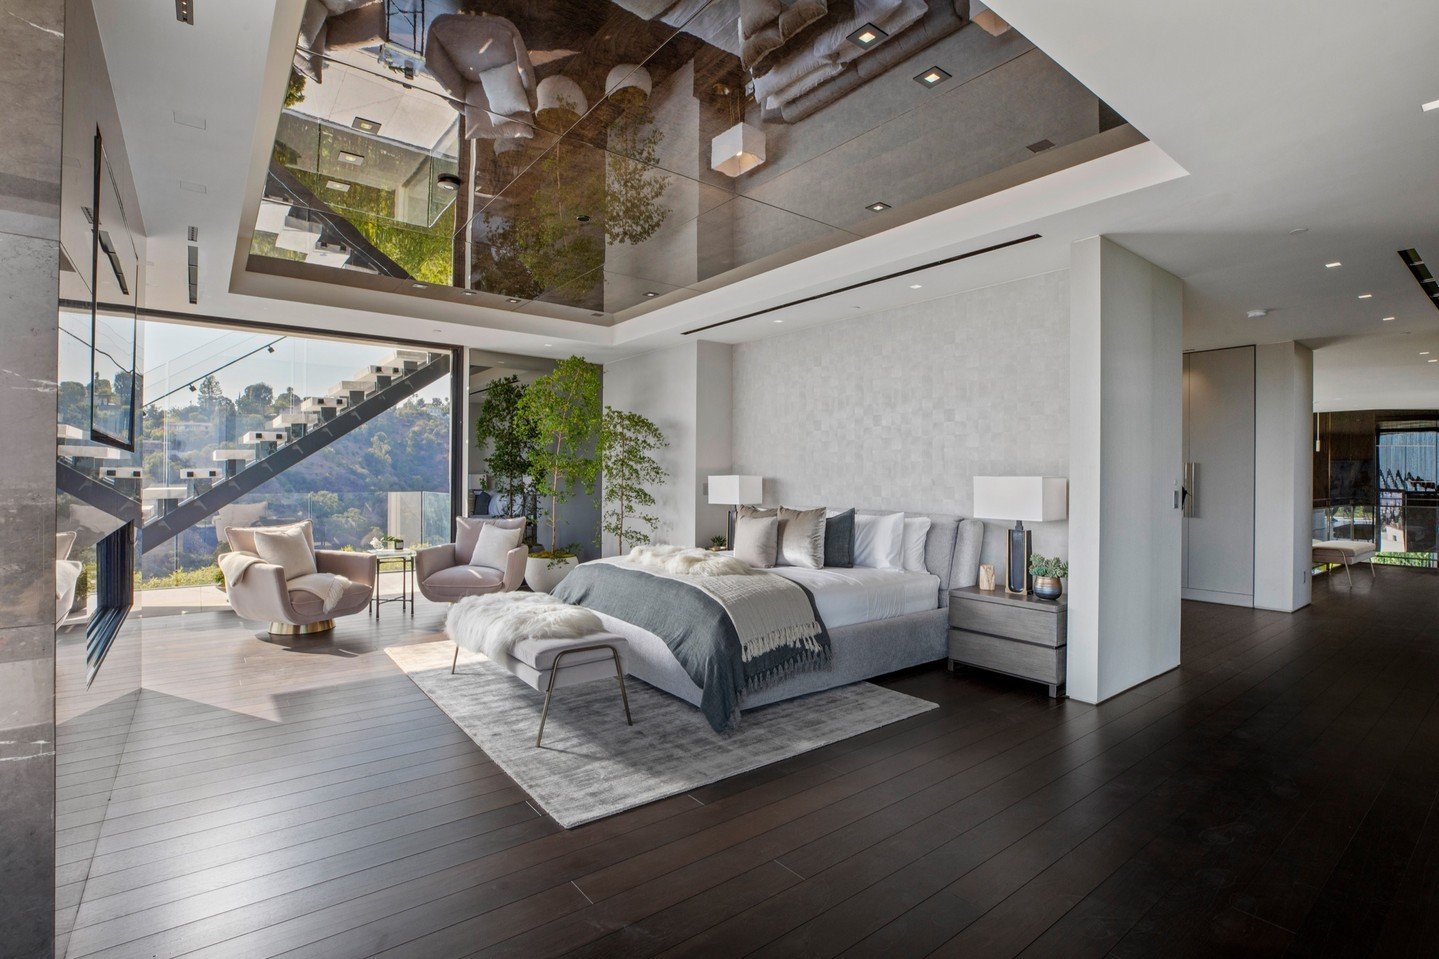 The resort style primary bedroom at our Summitridge Drive House in Beverly Hills, with private terrace accessed through sliding glass walls. Photo by @mrbarcelo